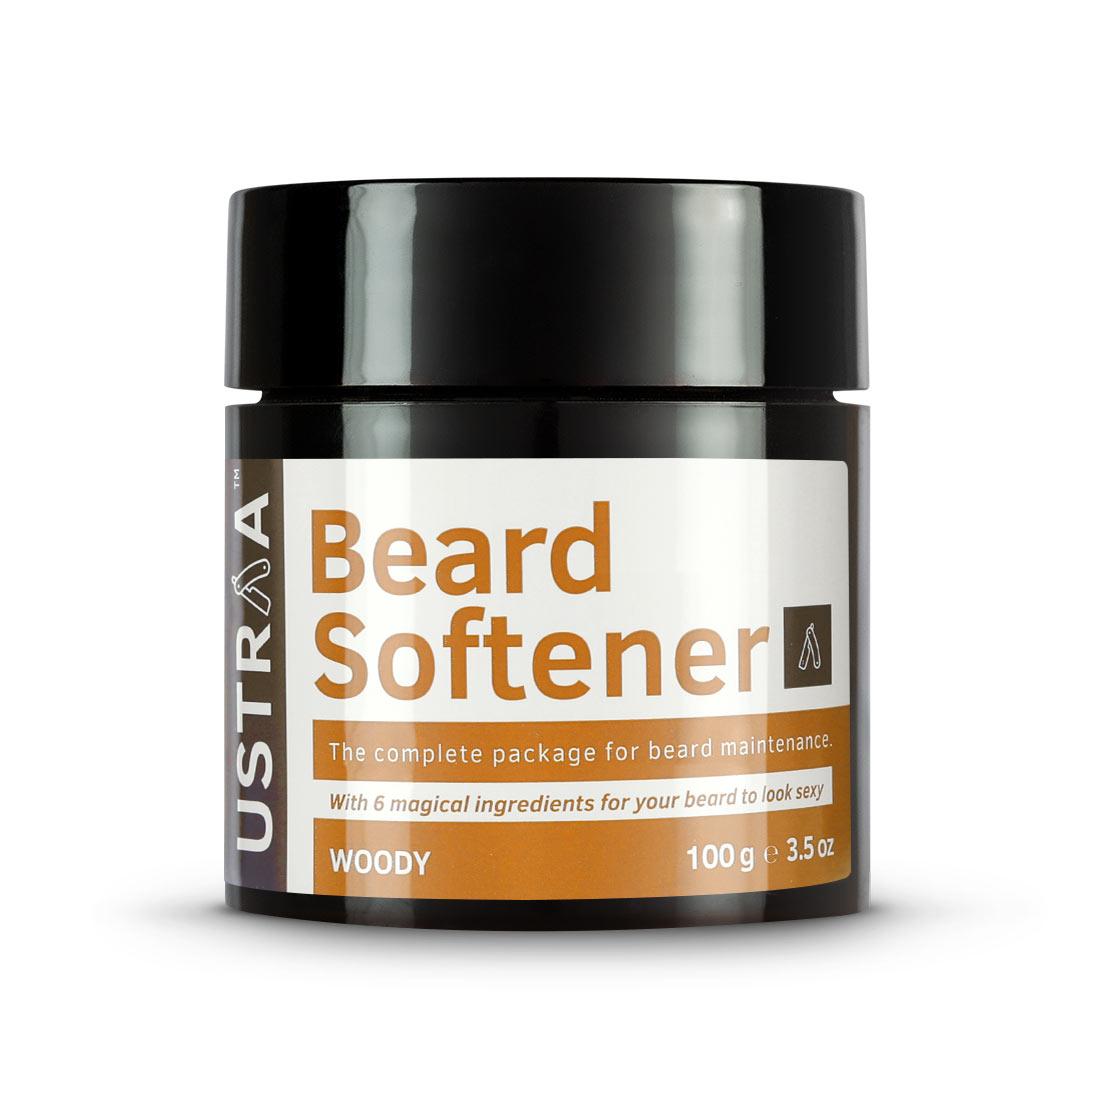 Ustraa Beard Softener Woody with Cedarwood and Argan oil - for a Nourished, Soft and Healthy Beard, 100g, softener, softner, softnr, balm, beard balm, beard wax, wax, beard softner, beard softener, beard softnr